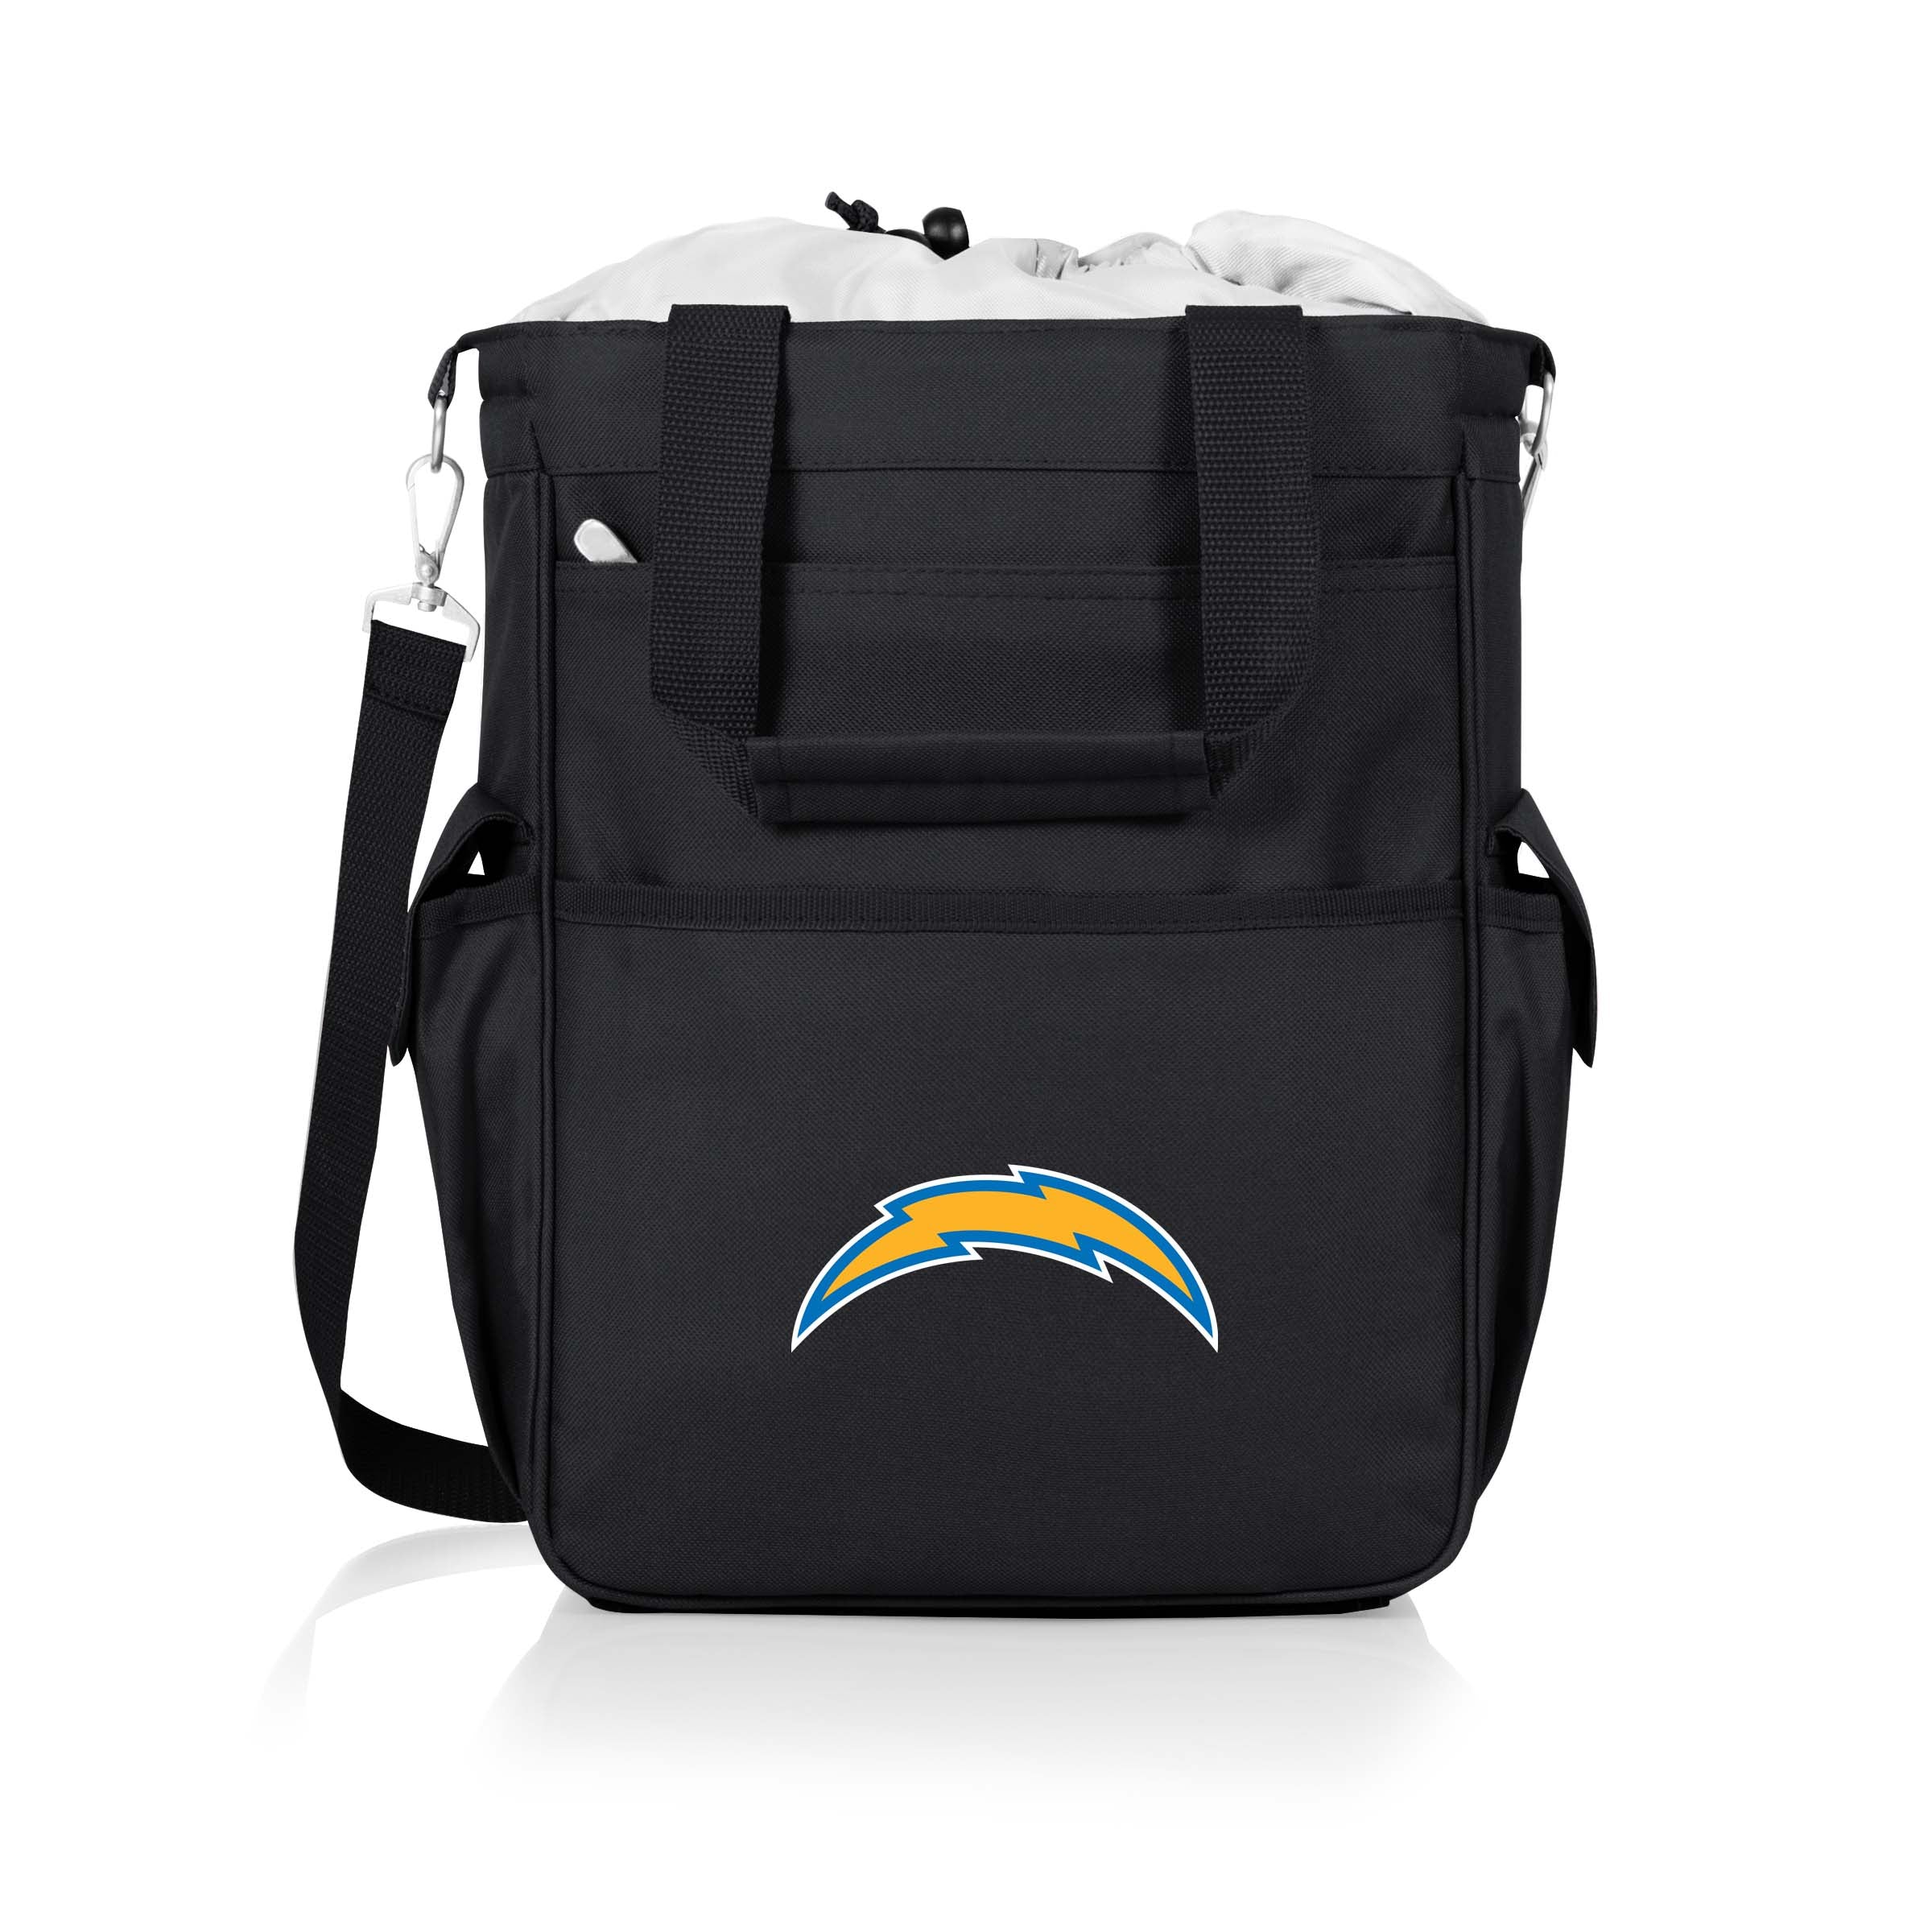 Los Angeles Chargers - Activo Cooler Tote Bag